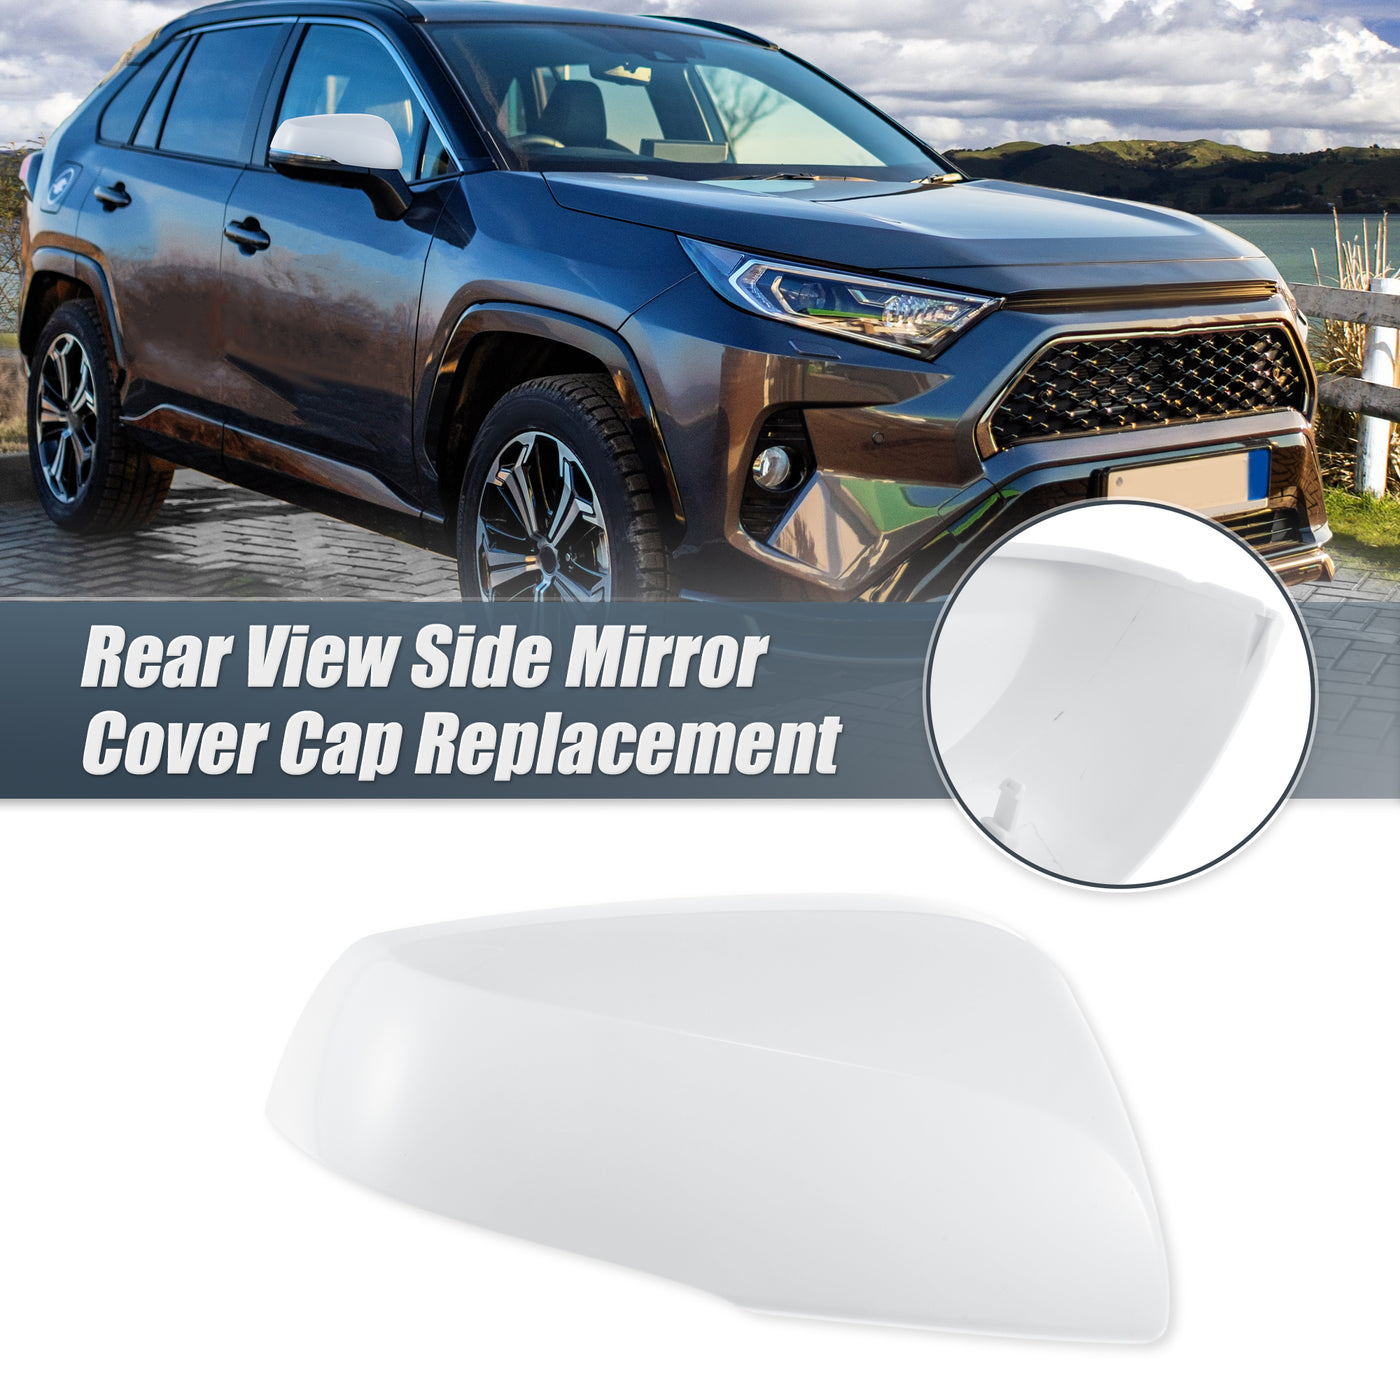 X AUTOHAUX Car Rear View Right Passenger Side Mirror Cover Cap Replacement White for Toyota RAV4 2019-2023 Mirror Guard Covers Exterior Decoration Trims